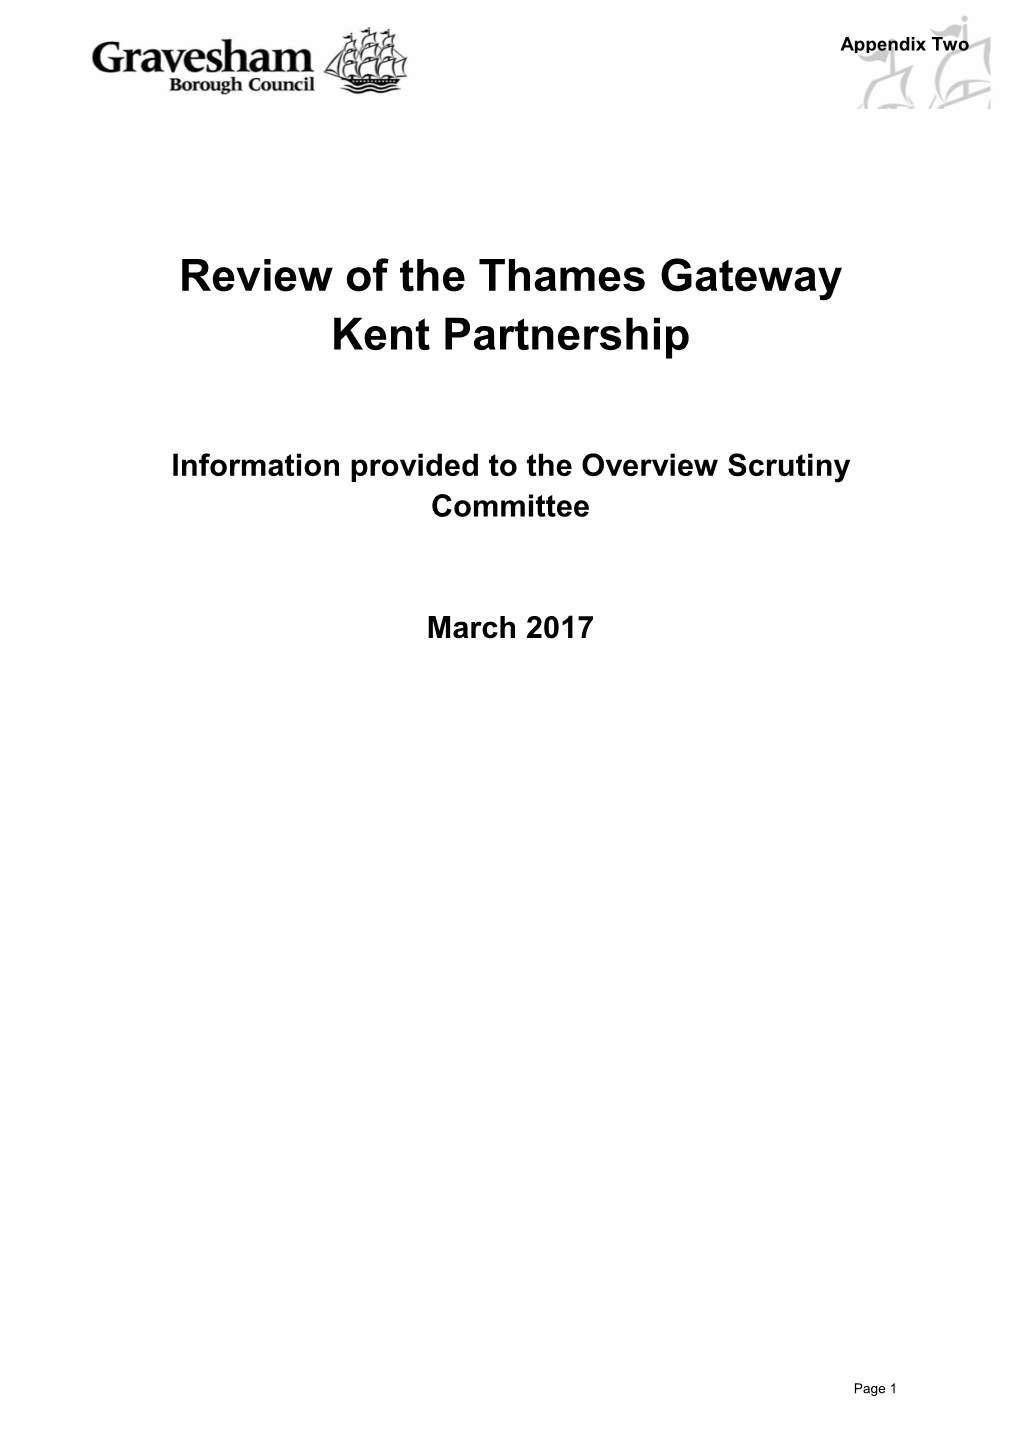 Review of the Thames Gateway Kent Partnership